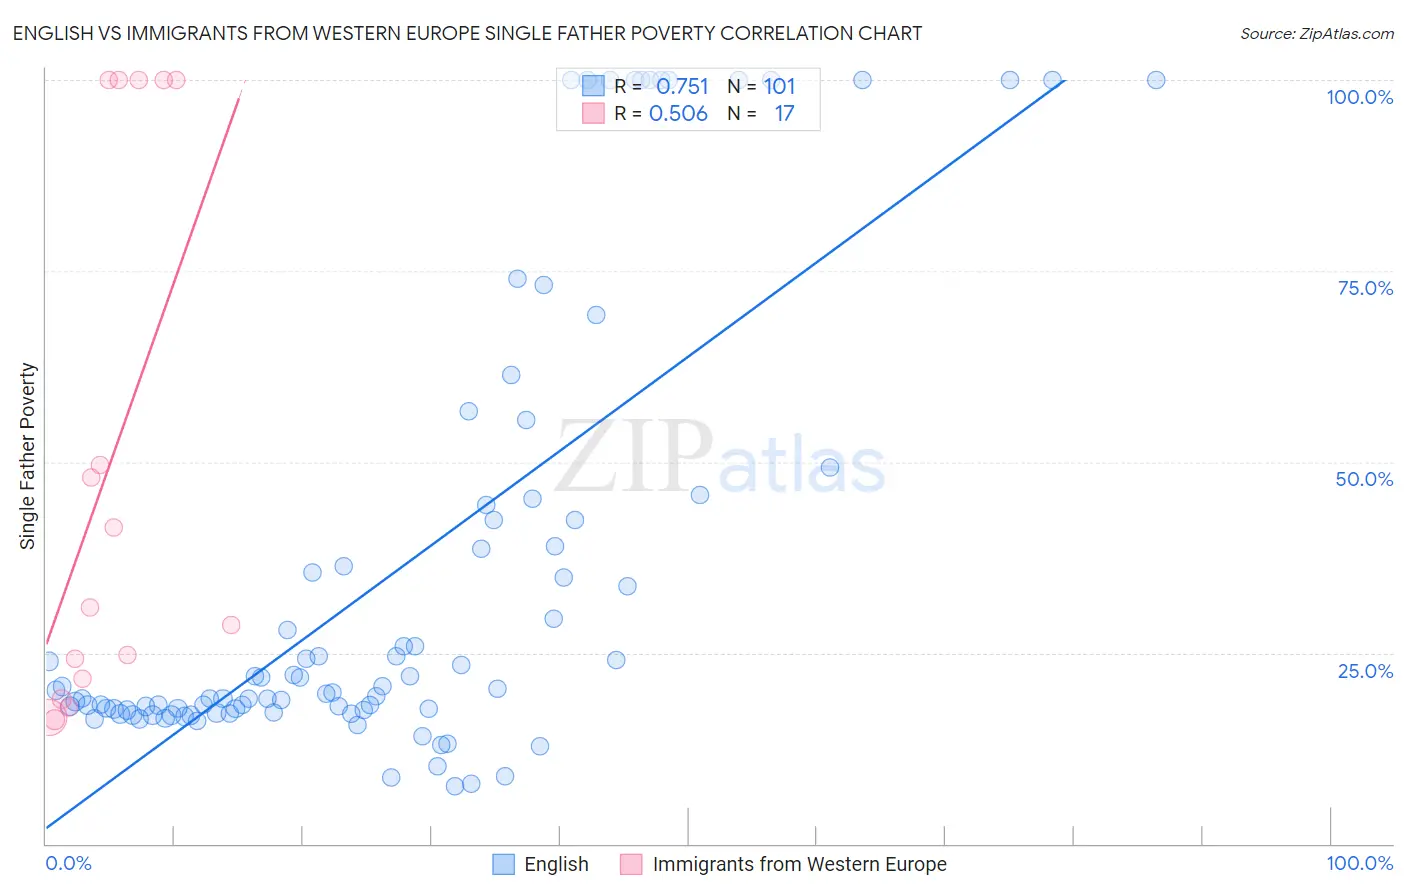 English vs Immigrants from Western Europe Single Father Poverty